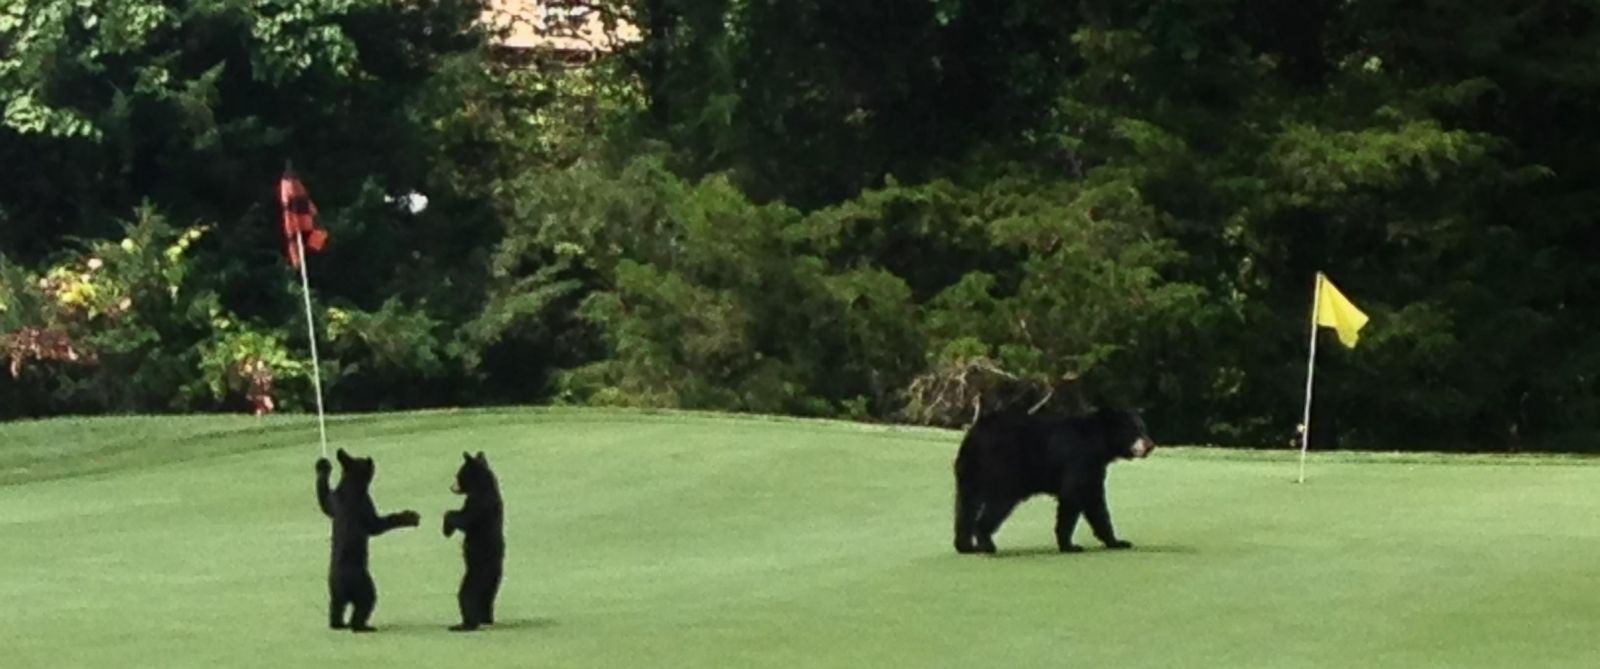 Adorable Bear Family Frolicked on New Jersey Golf Course ABC News